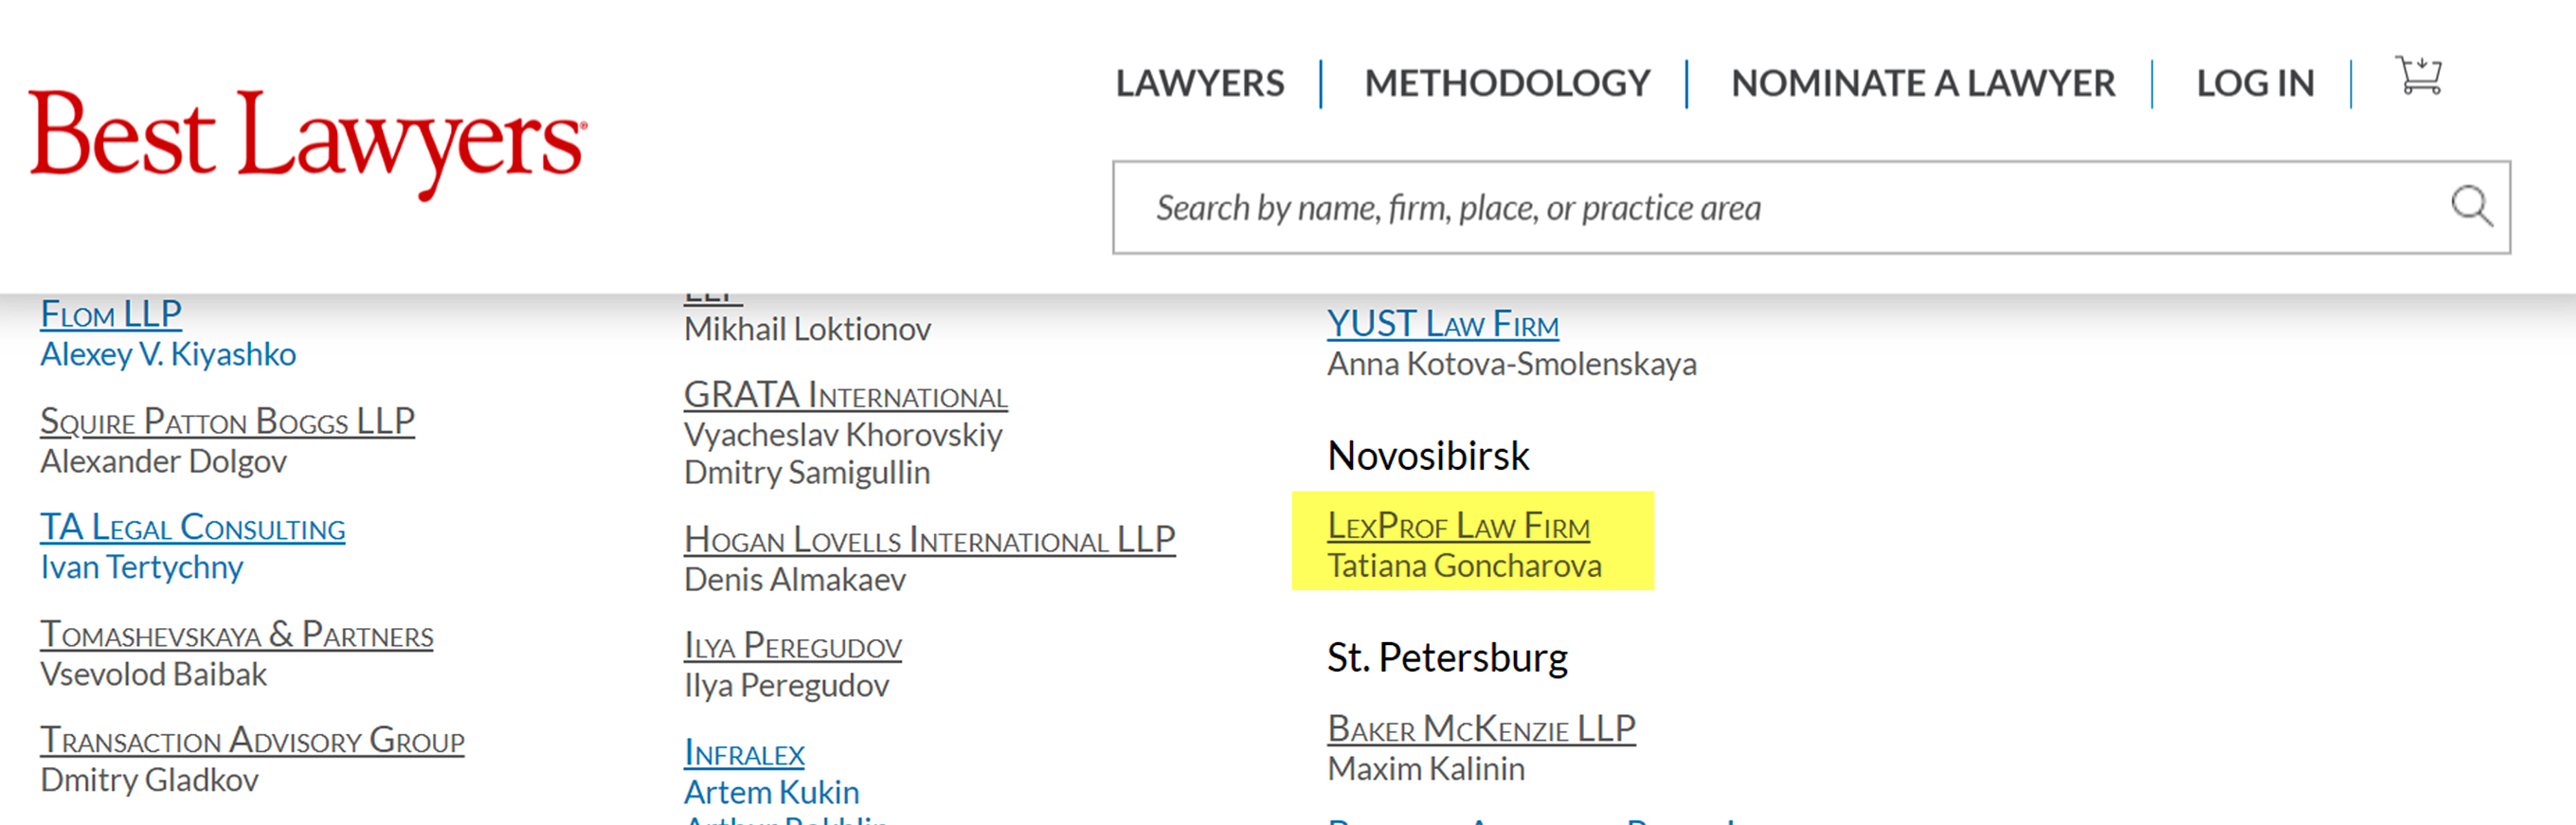 bestlawyers m and a